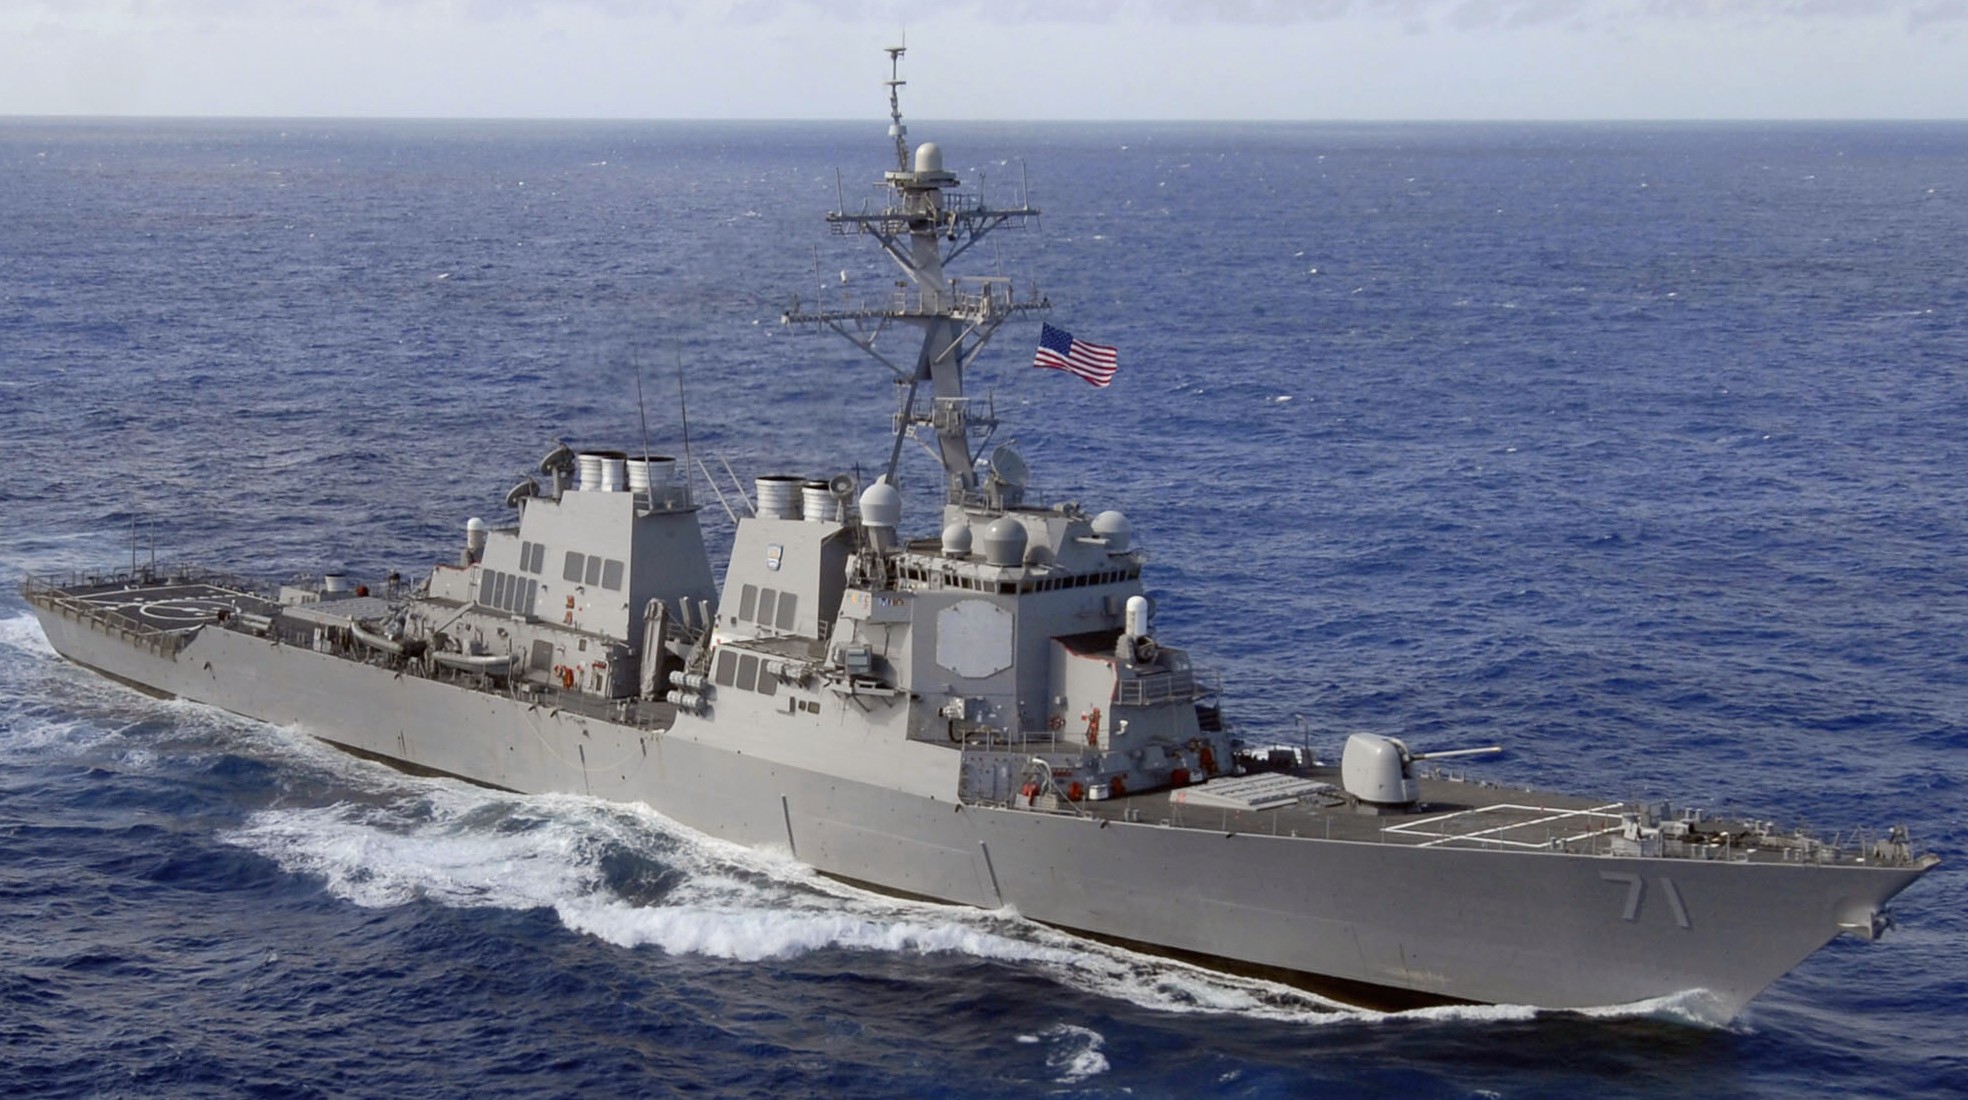 ddg-71 uss ross guided missile destroyer arleigh burke class aegis bmd 88